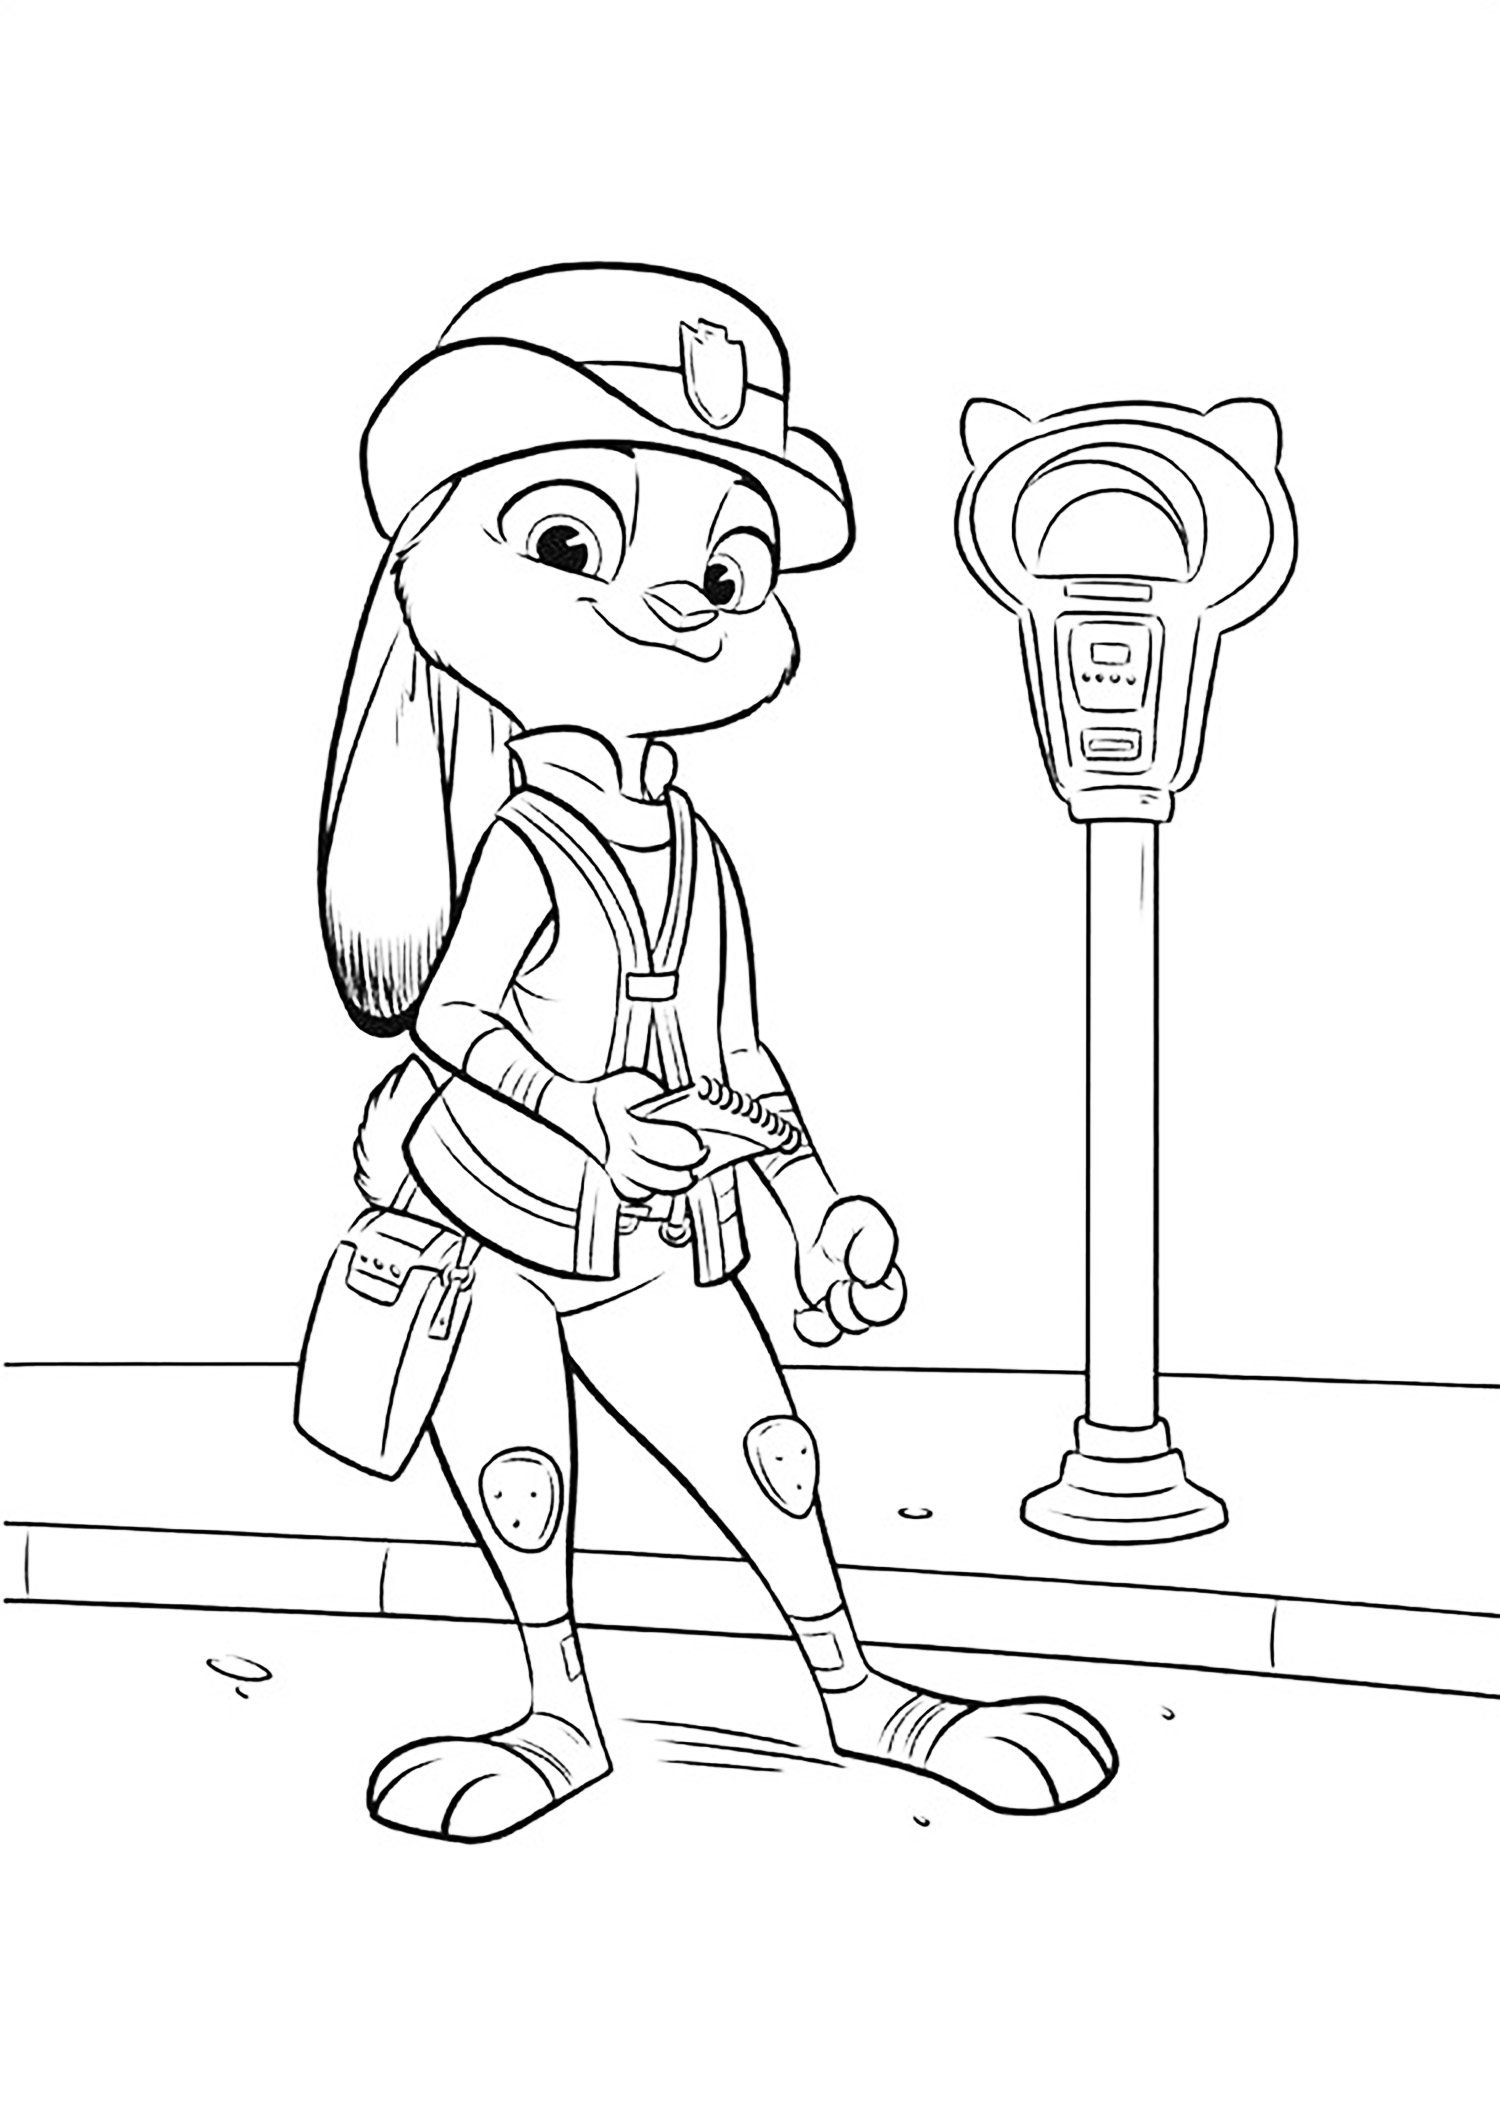 Zootopia for kids - Zootopia Kids Coloring Pages